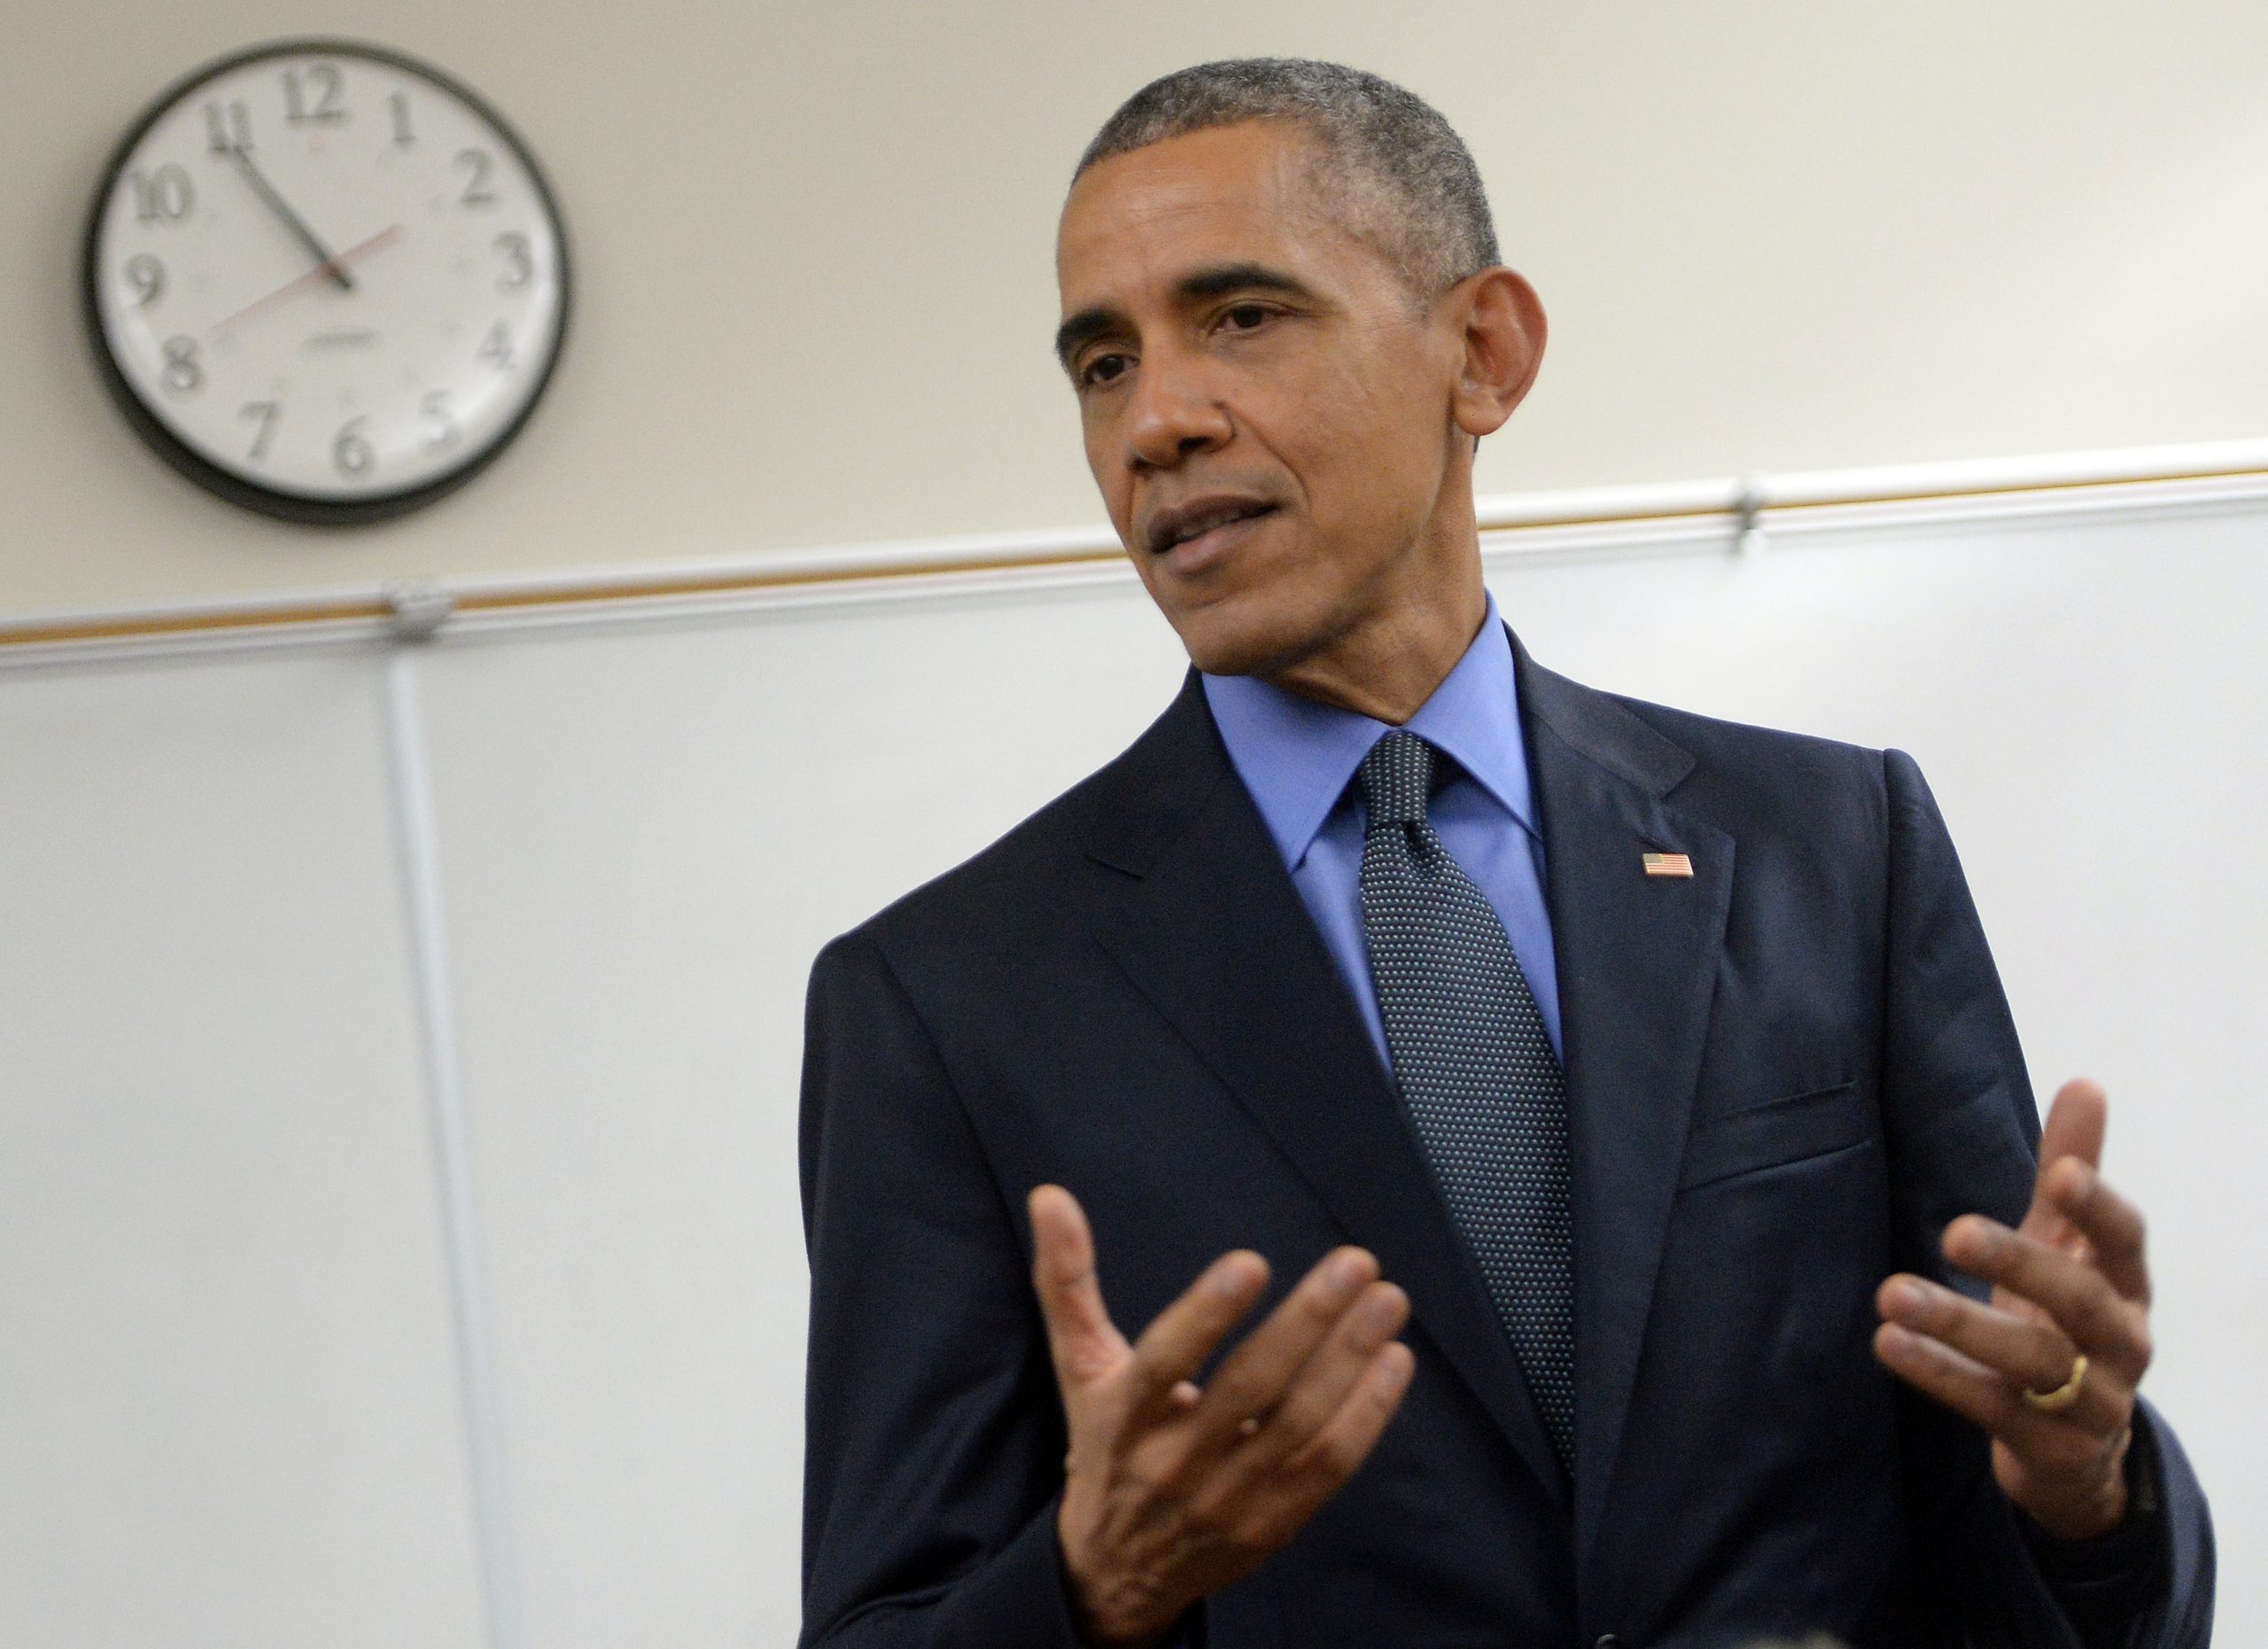 resident Barack Obama makes a brief statement in a classroom at Indian Springs High School Friday evening December 18, 2015. The President and the First Lady met with family members of those killed during a mass shooting that left 14 dead at the Inland Regional Center in San Bernardino Dec. 2.(POOL PHOTO Will Lester/San Bernardino Sun)